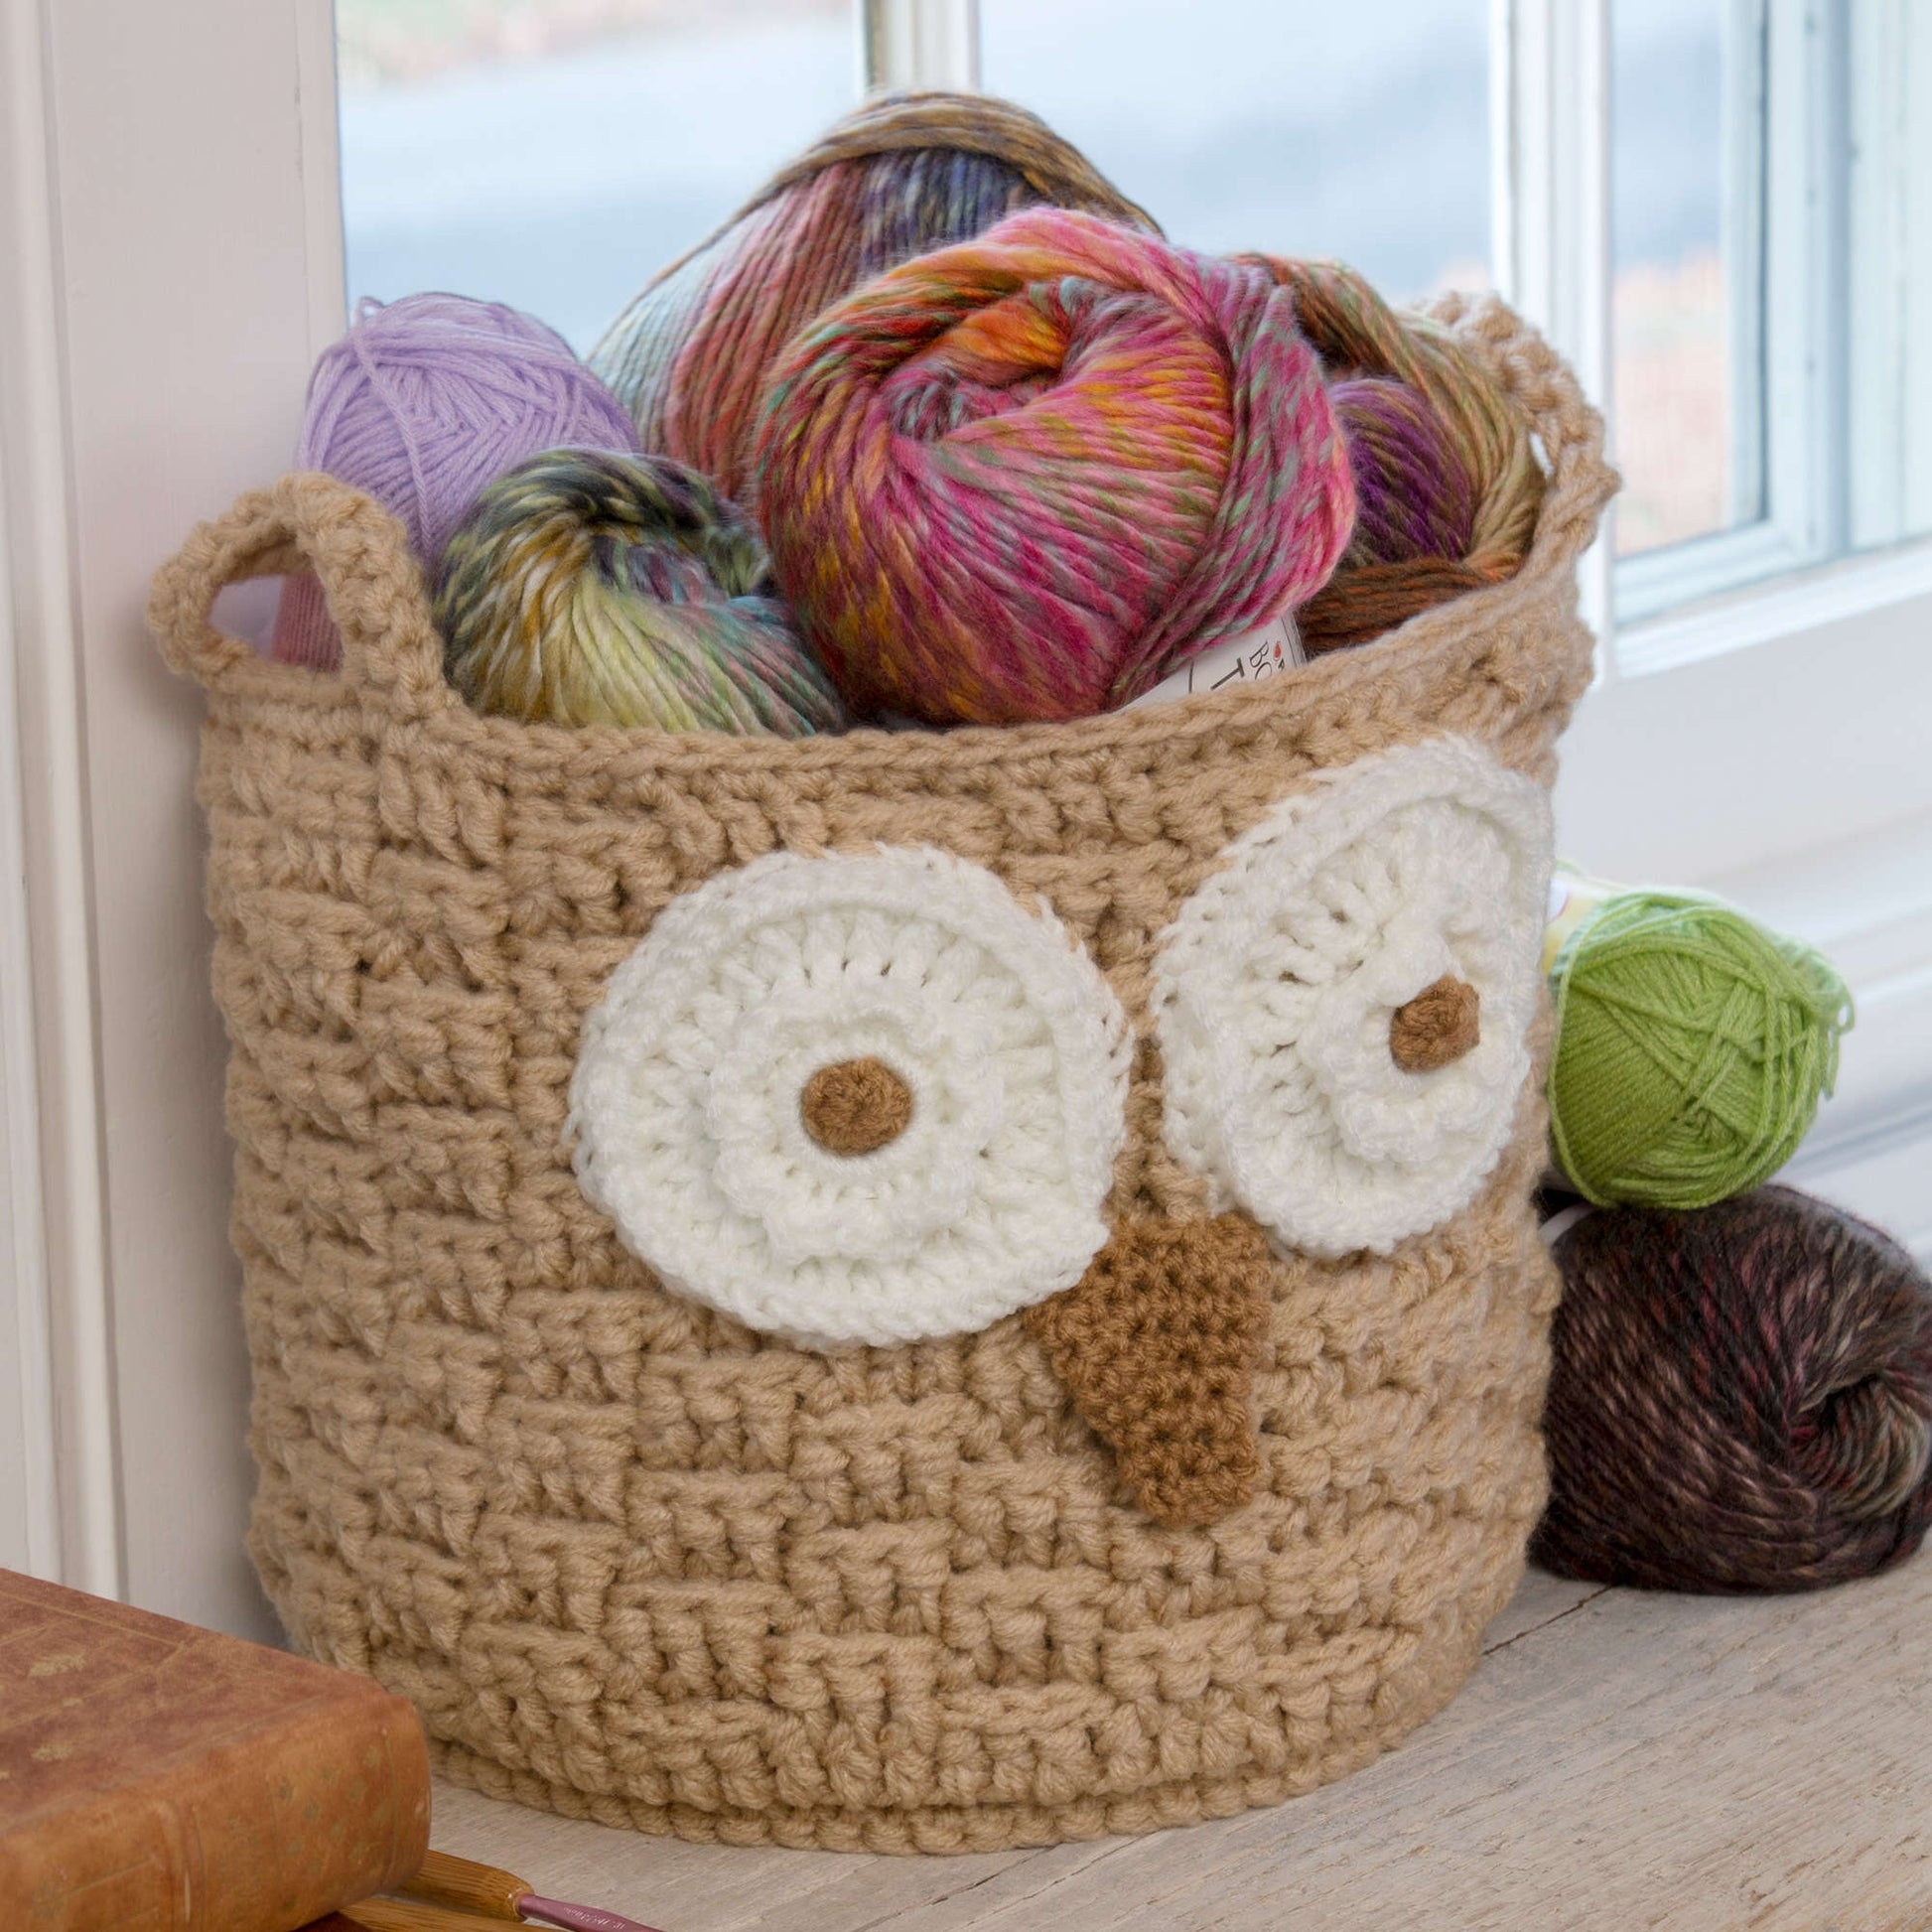 Free Red Heart Crochet It's a Hoot Owl Container Pattern